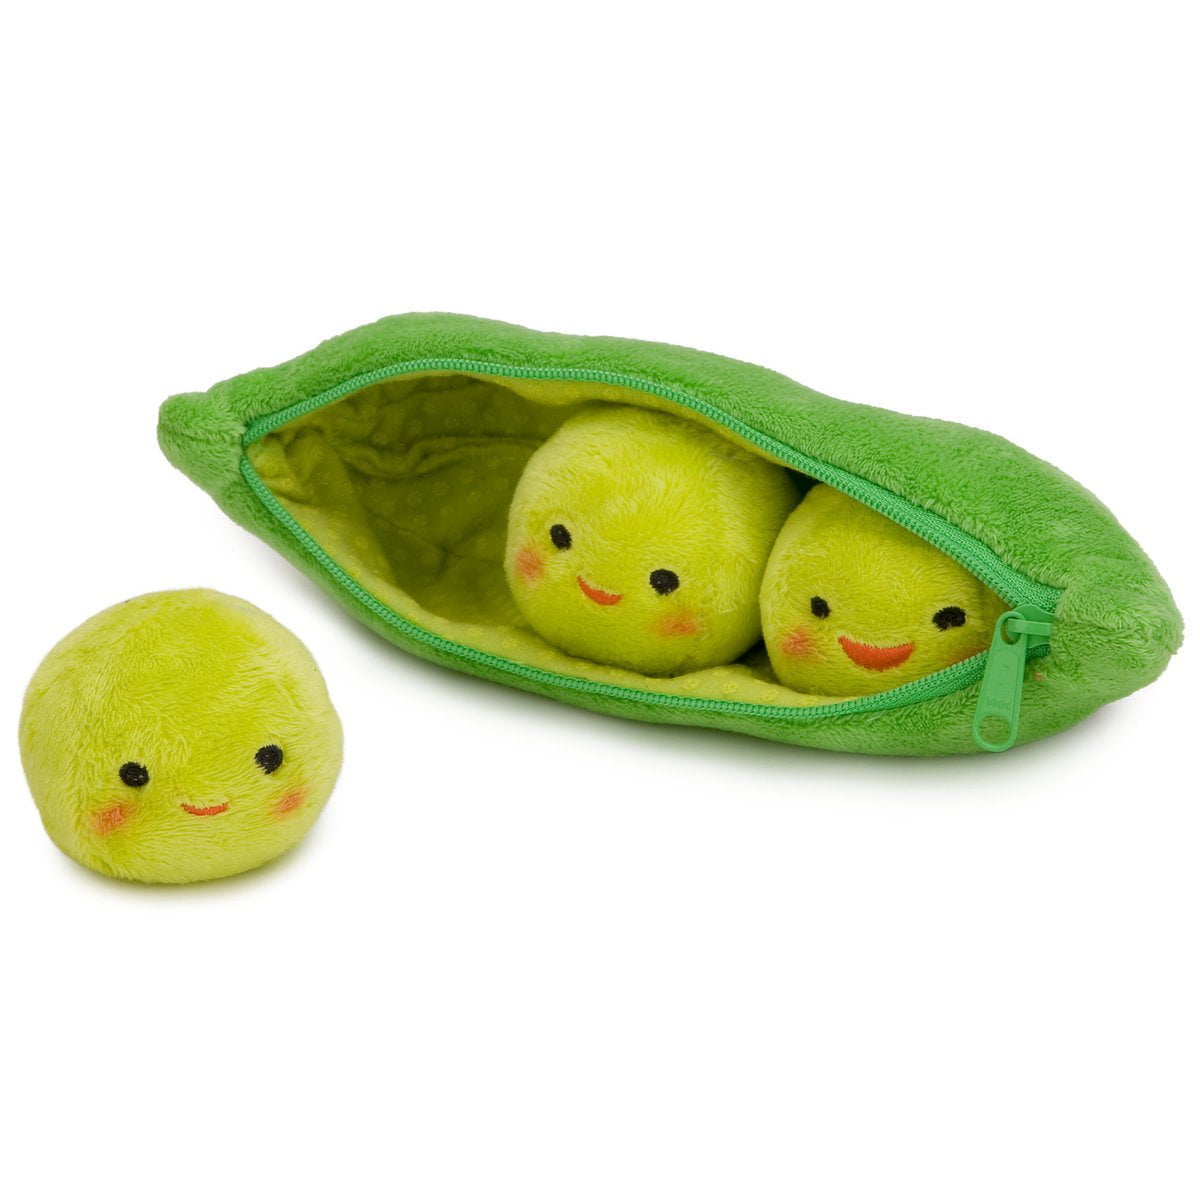 New 8" Disney Store Toy Story Bean Bag Peas in a Pod Plush Toy 